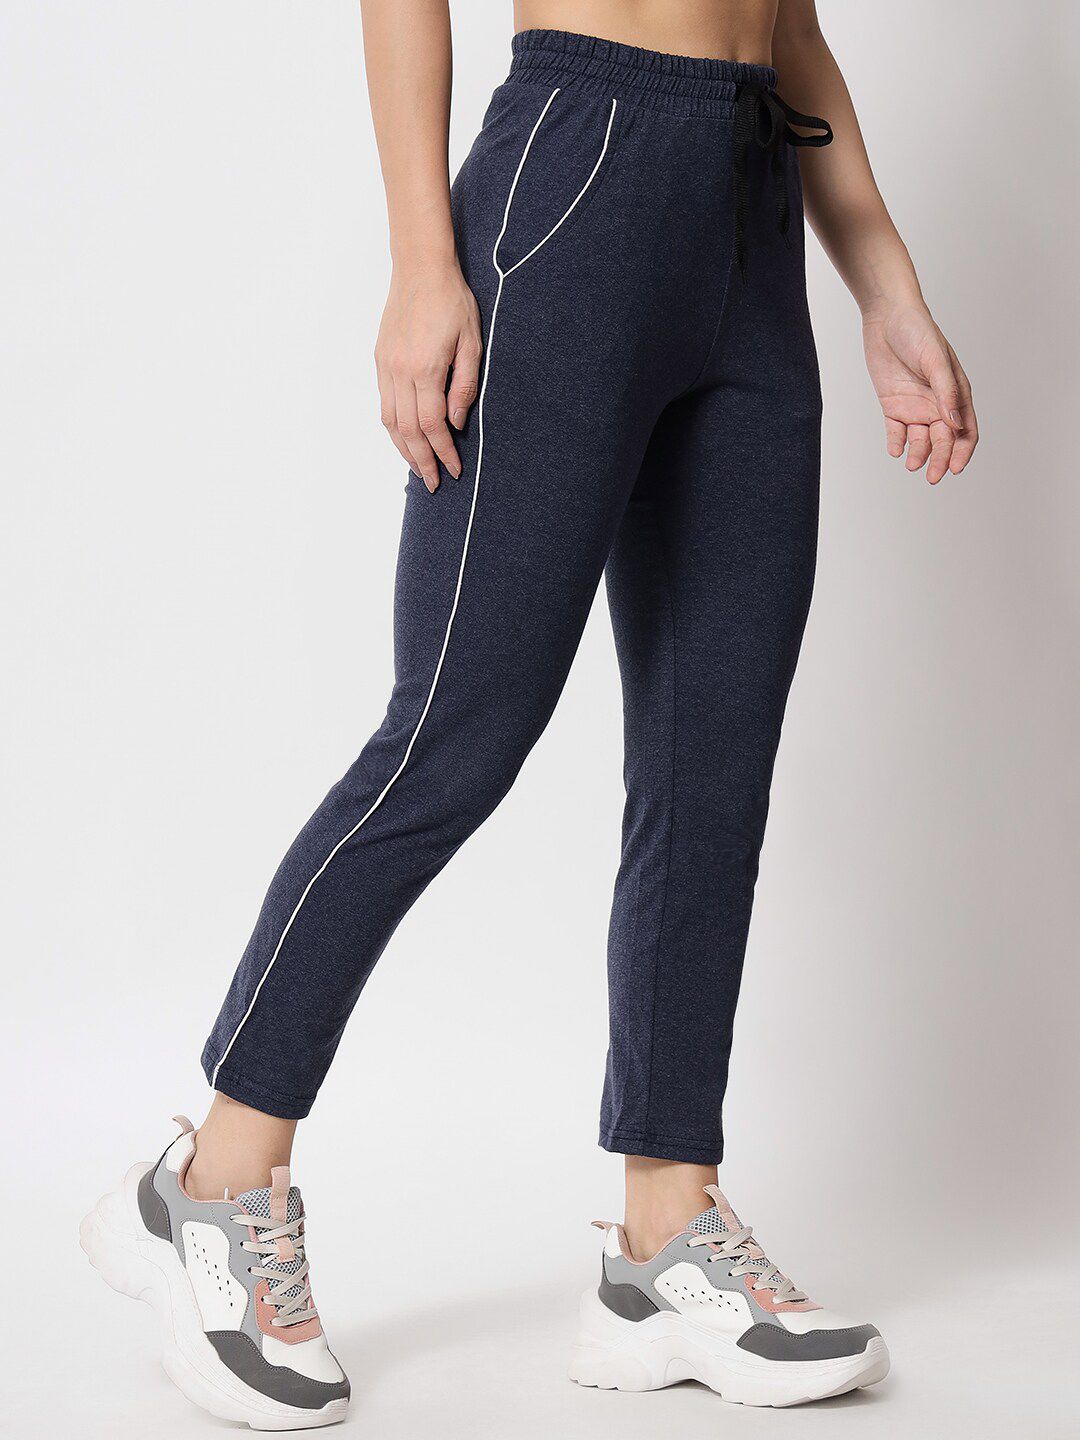 Q-rious Women Navy Blue Regular Fit Solid Track Pants Price in India